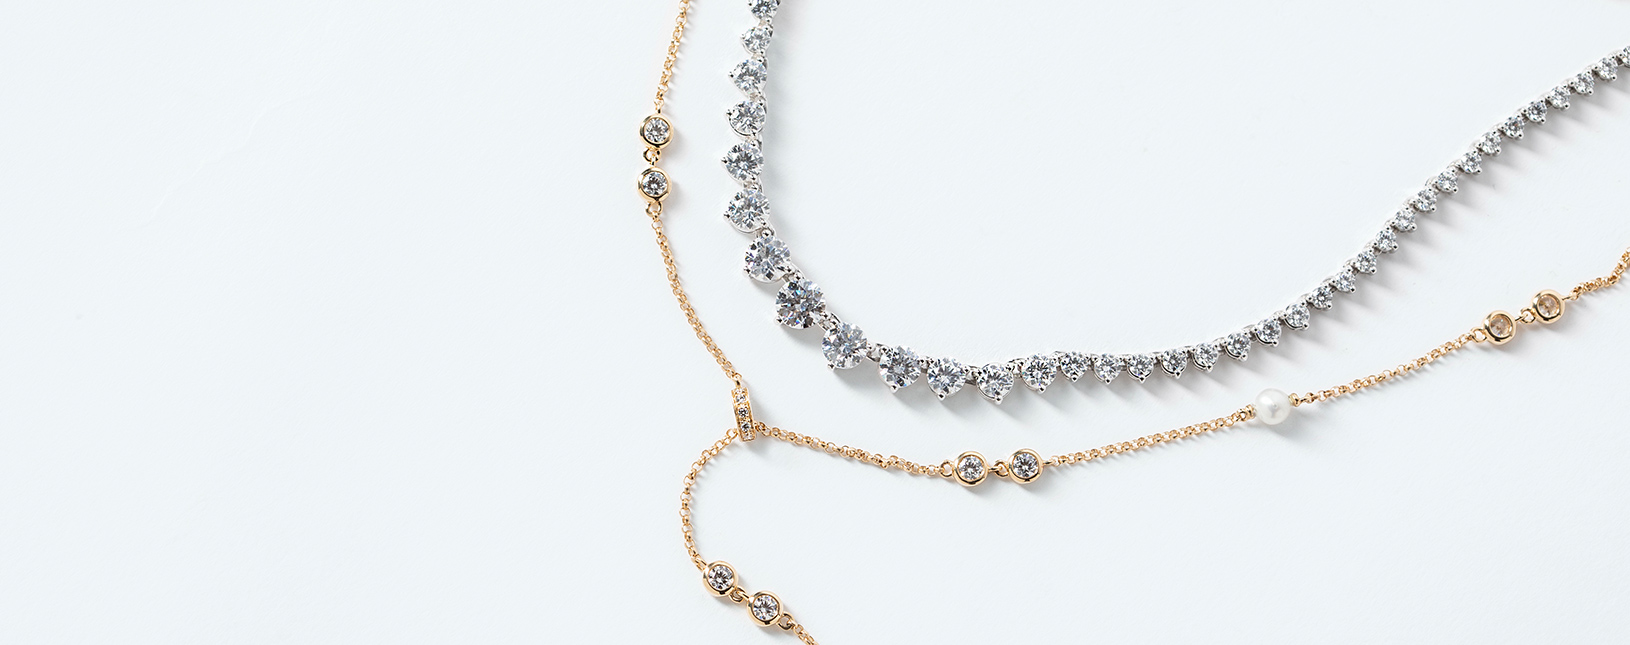 Two necklaces featuring lab grown diamond alternatives